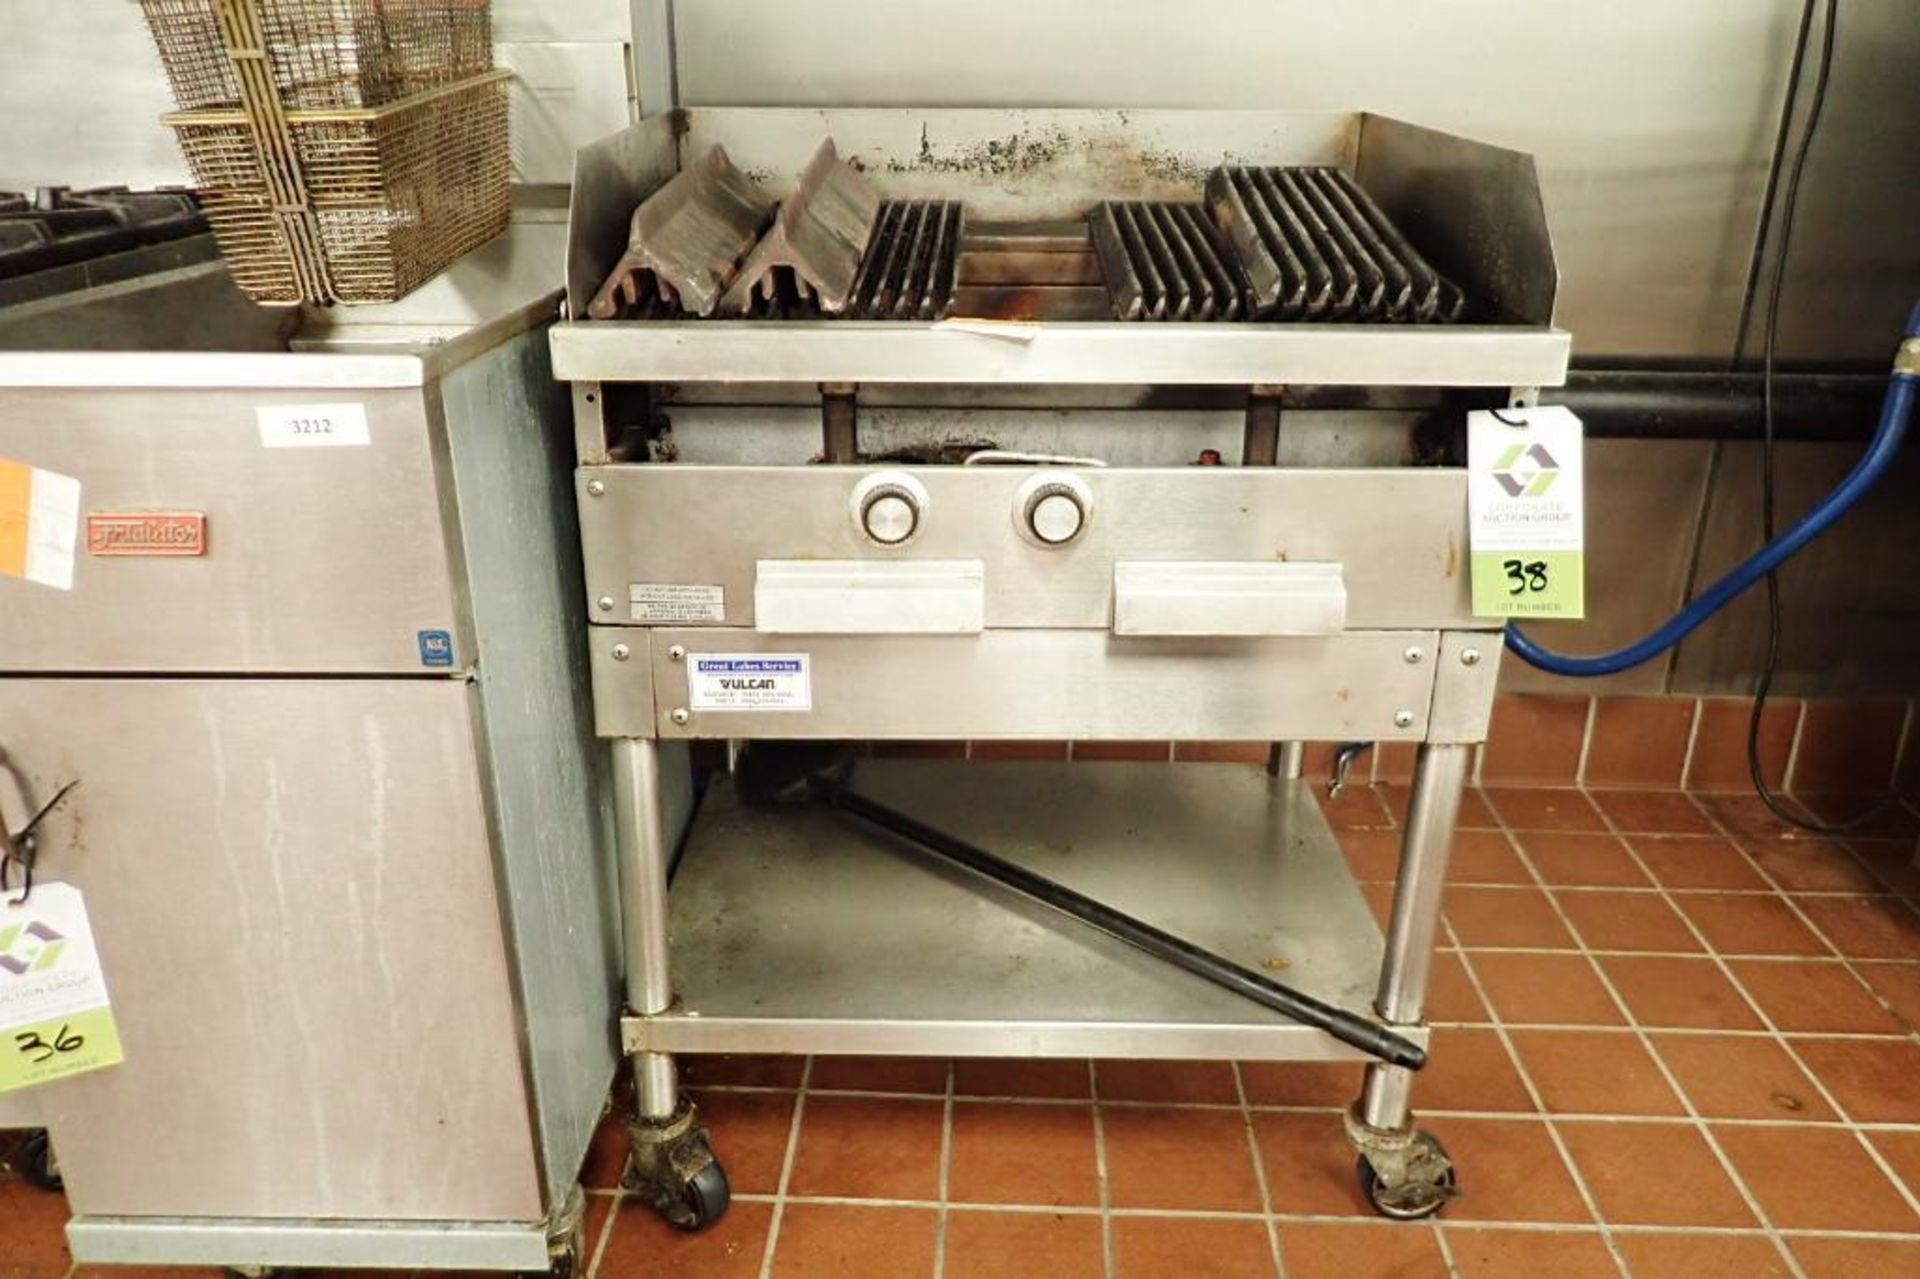 Vulcan grill, natural gas, 29 in. wide x 24 in. deep x 34 in. tall, on casters (bad) - Image 2 of 5